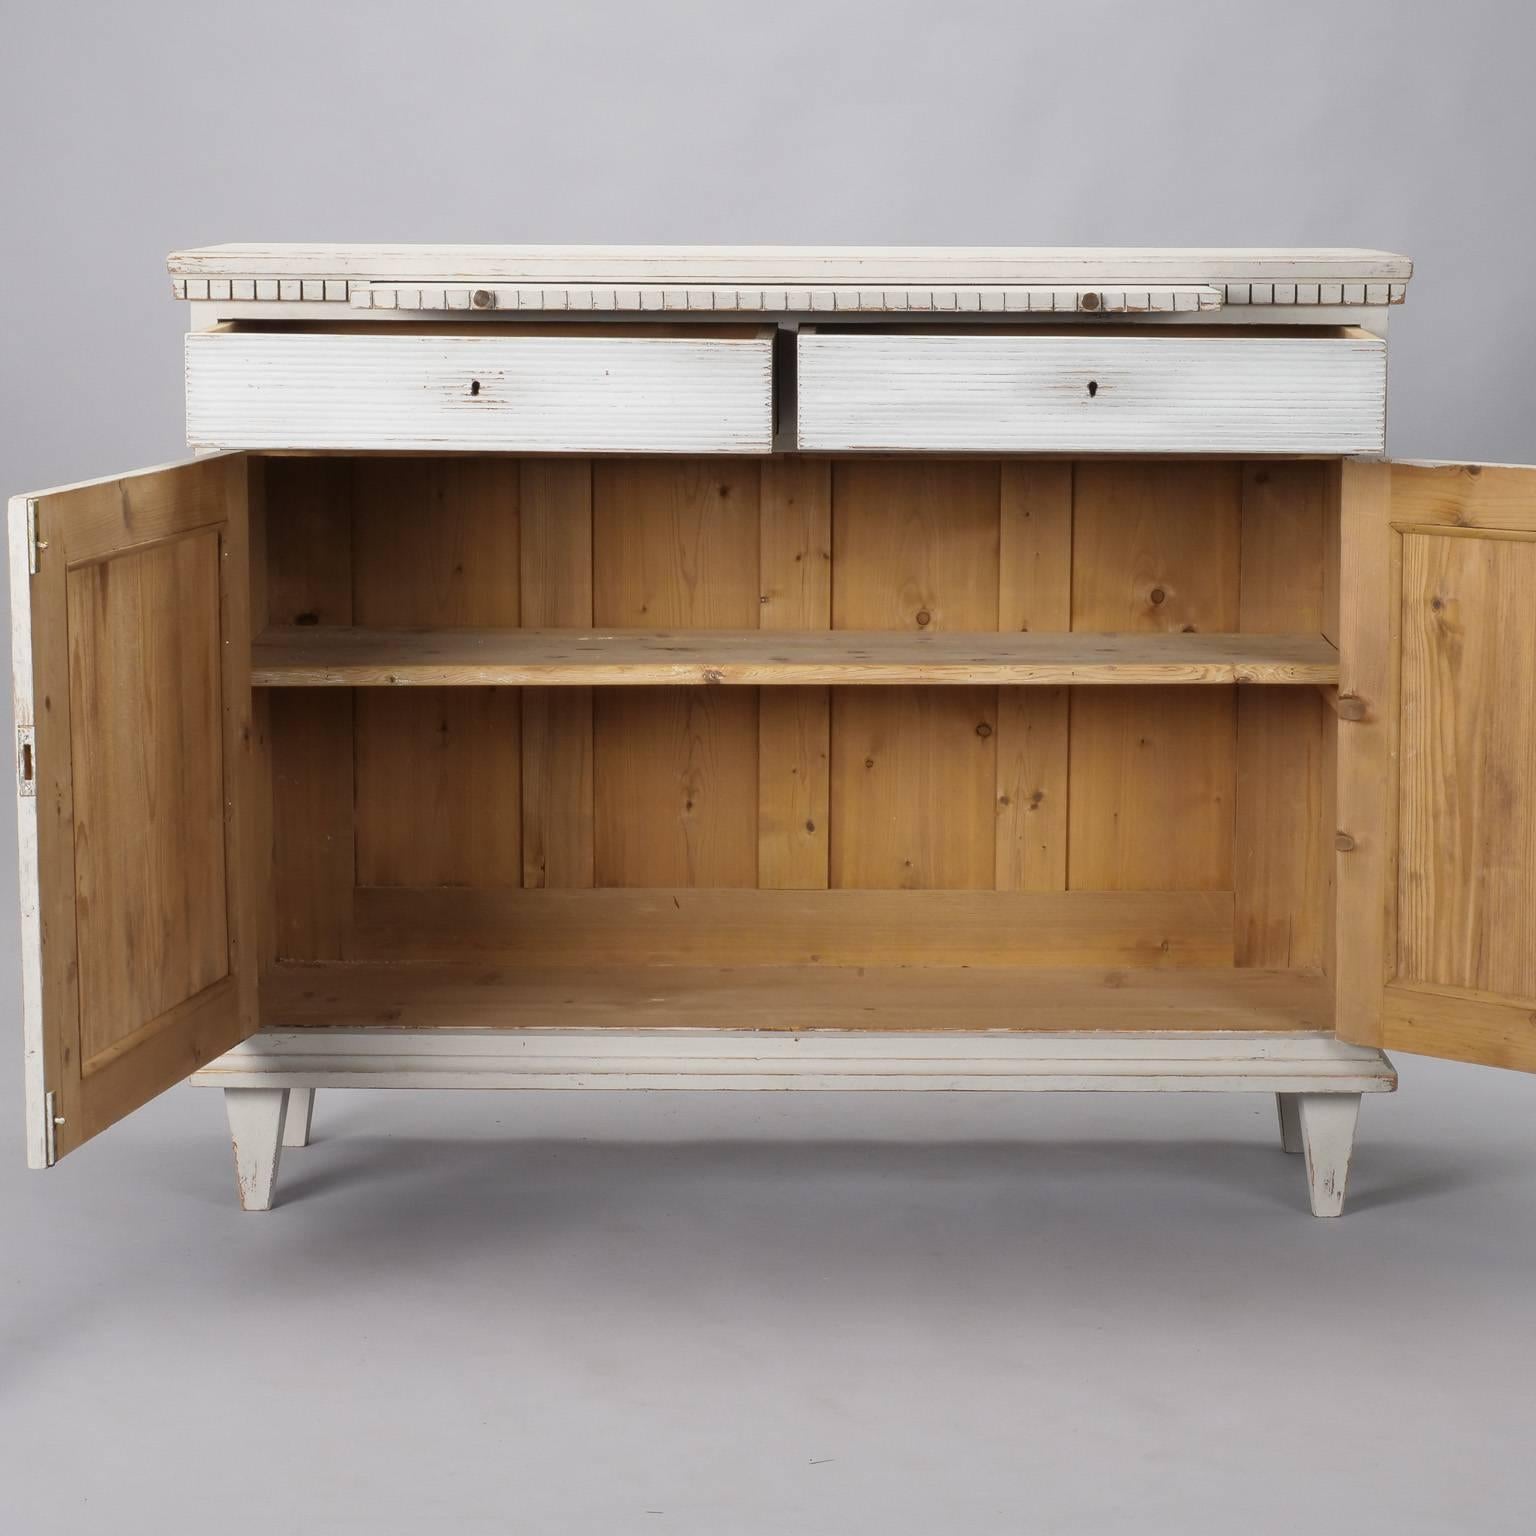 Swedish cabinet is painted in ecru with contrasting white diamond panels and drawer fronts and carved details. Two locking drawers over hinged door locking cabinet feature ridged texture decorative diamond fronts. Internal single shelf. Above the